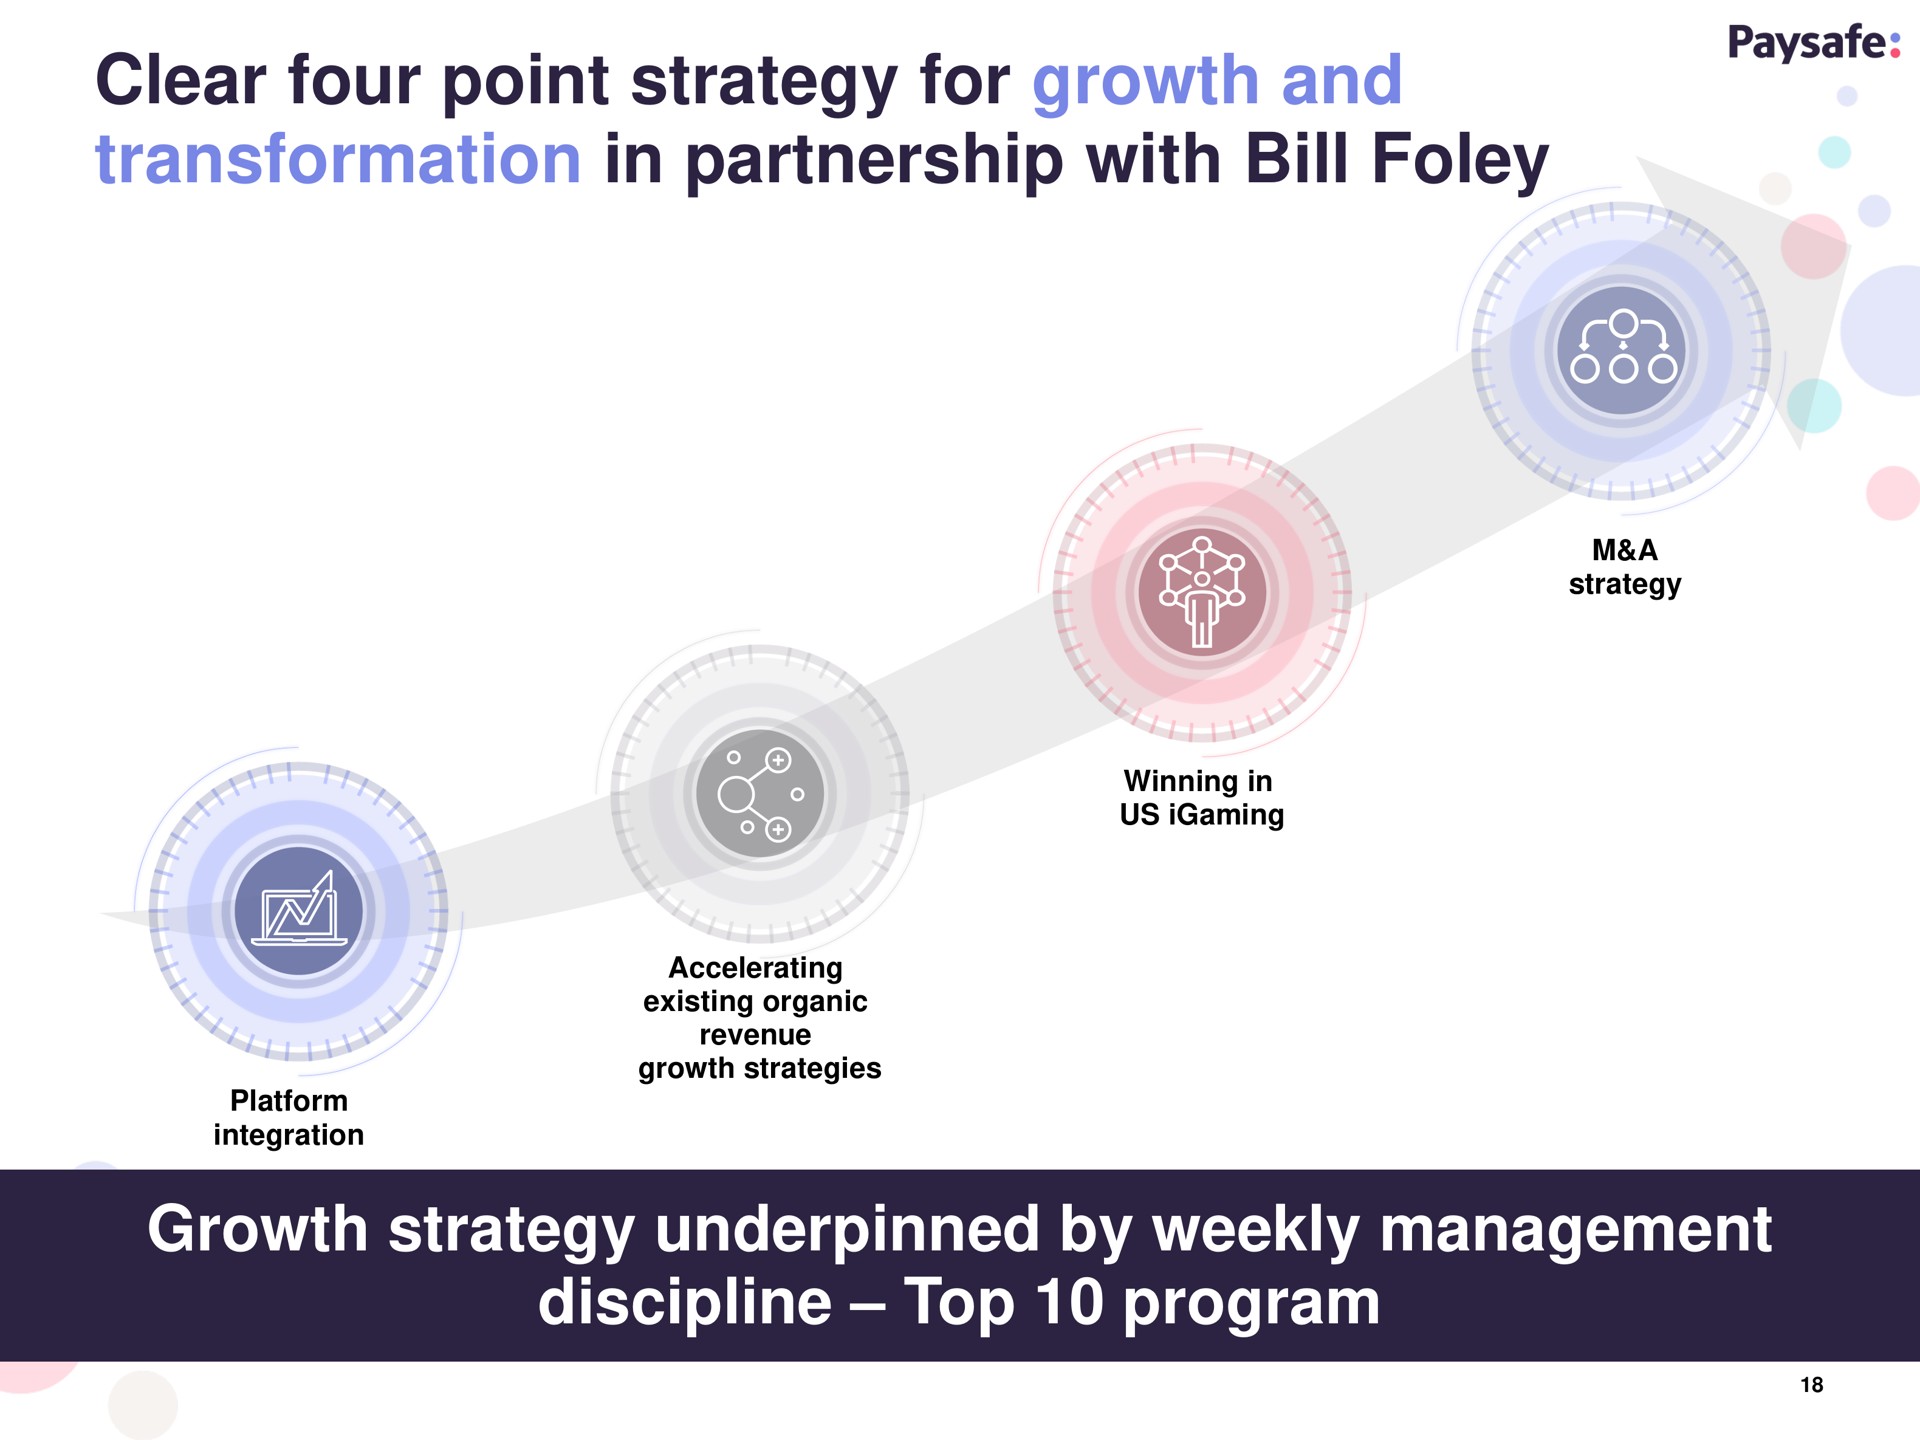 clear four point strategy for growth and transformation in partnership with bill growth strategy underpinned by weekly management discipline top program | Paysafe